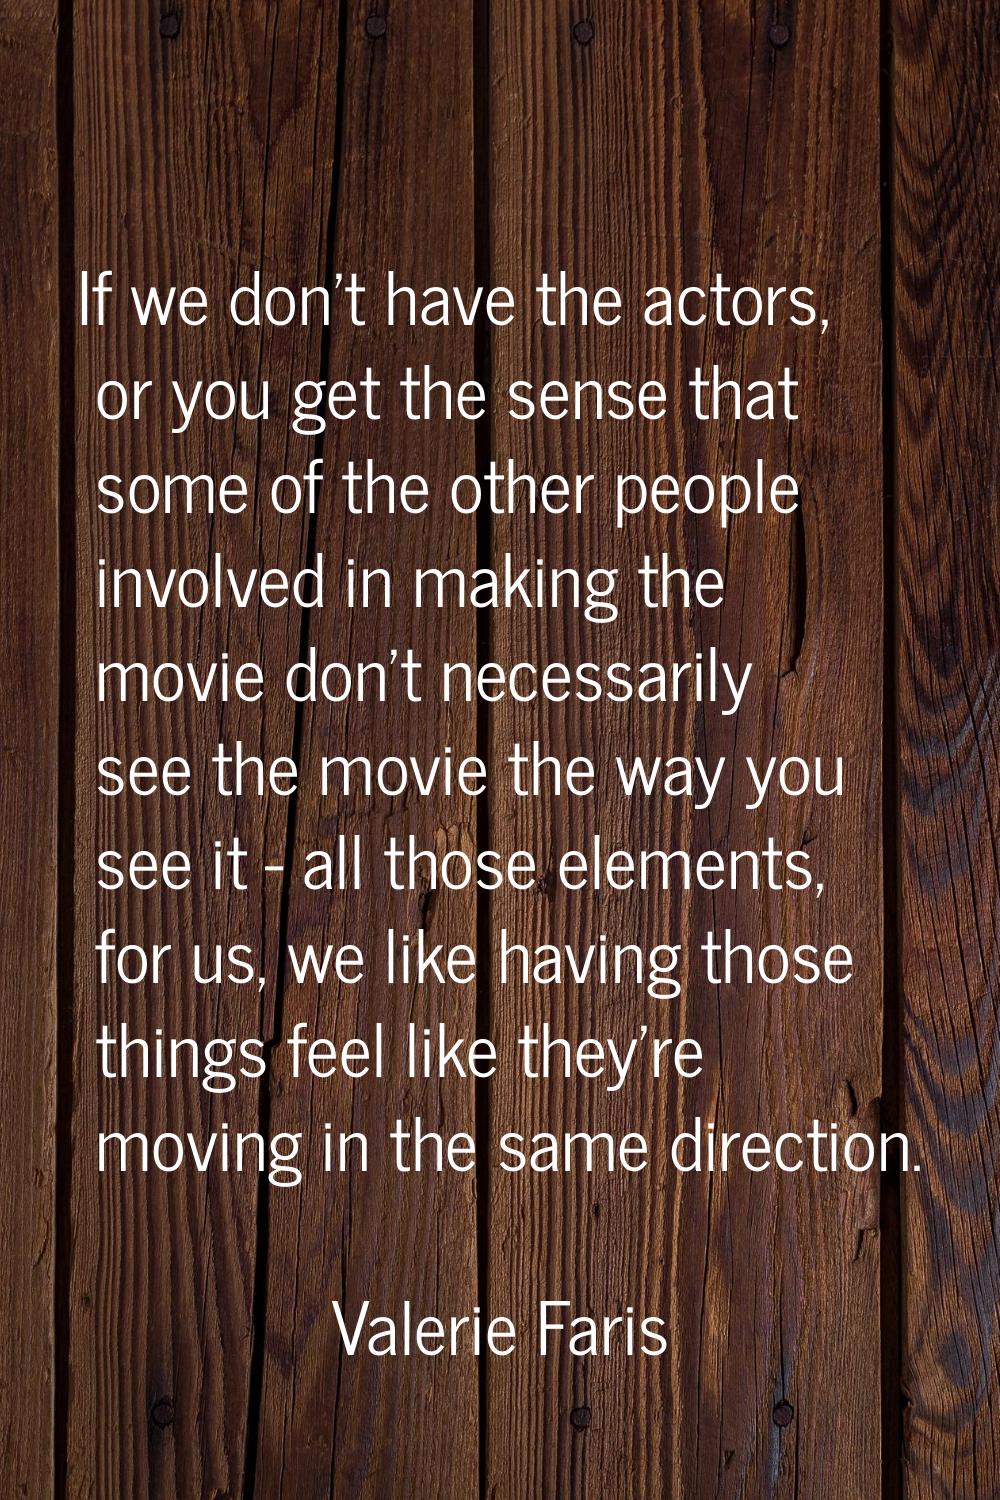 If we don't have the actors, or you get the sense that some of the other people involved in making 